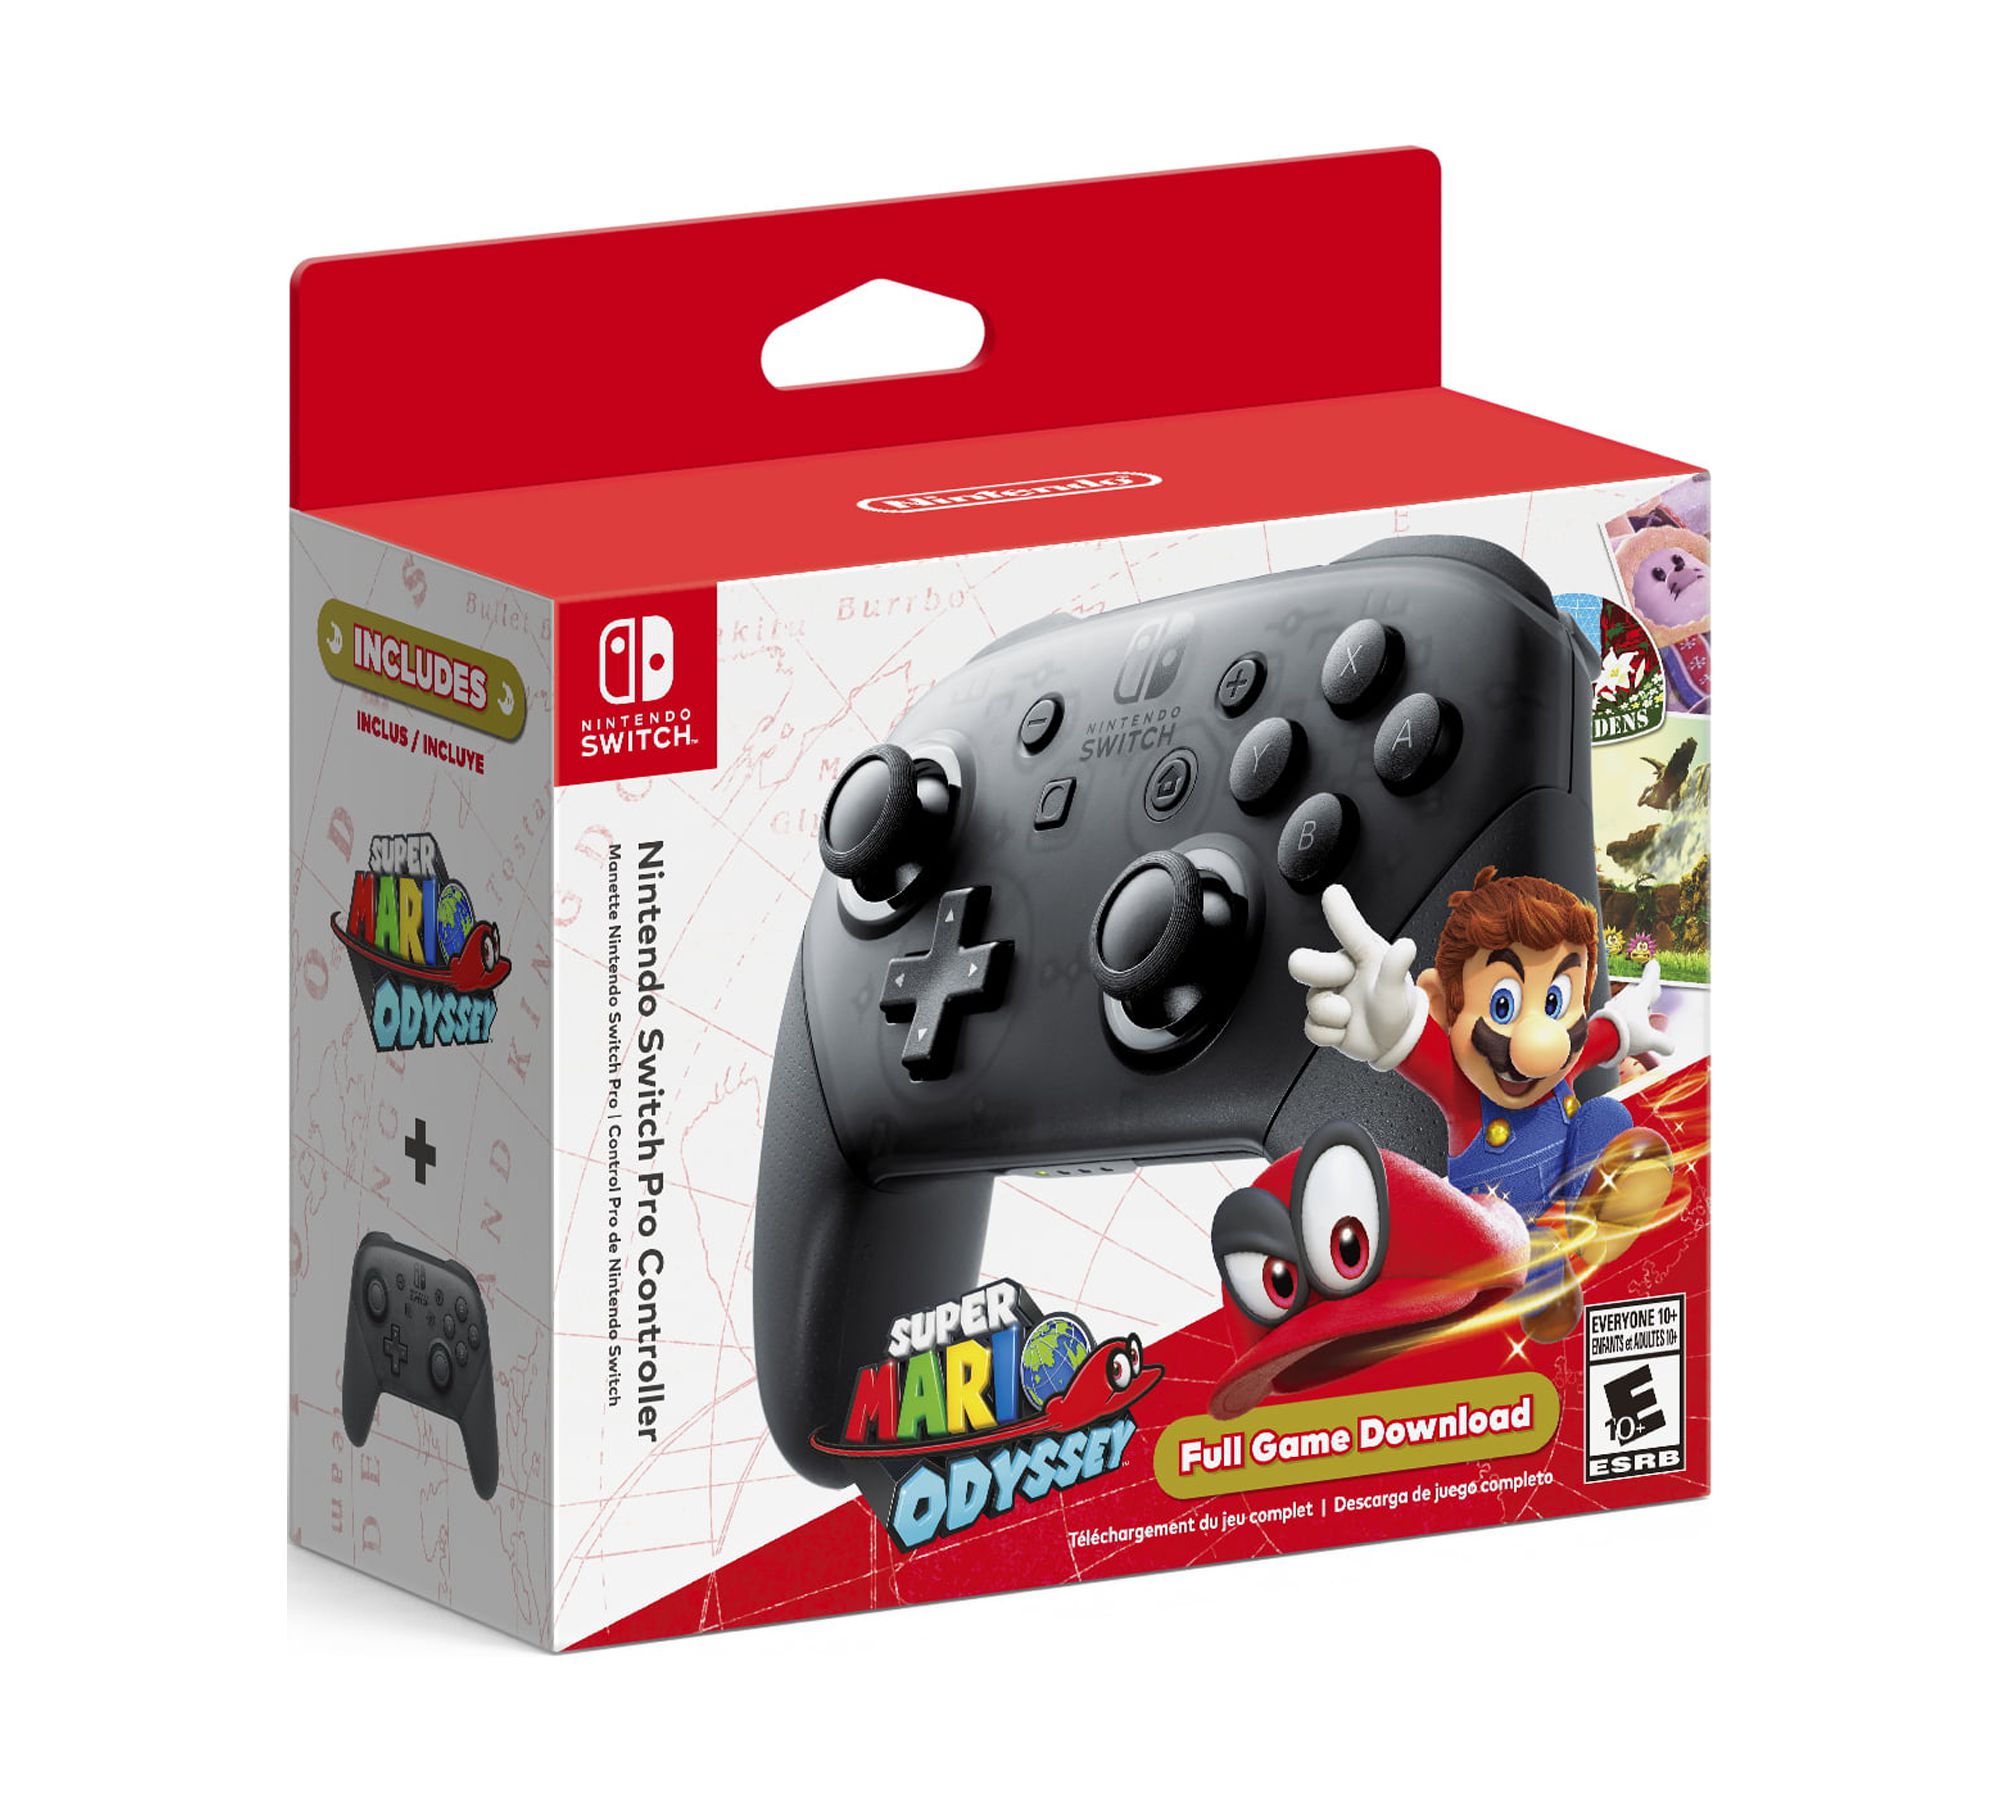 Nintendo Switch Pro Controller with Super Mario Odyssey Full Game Download Code - image 2 of 3